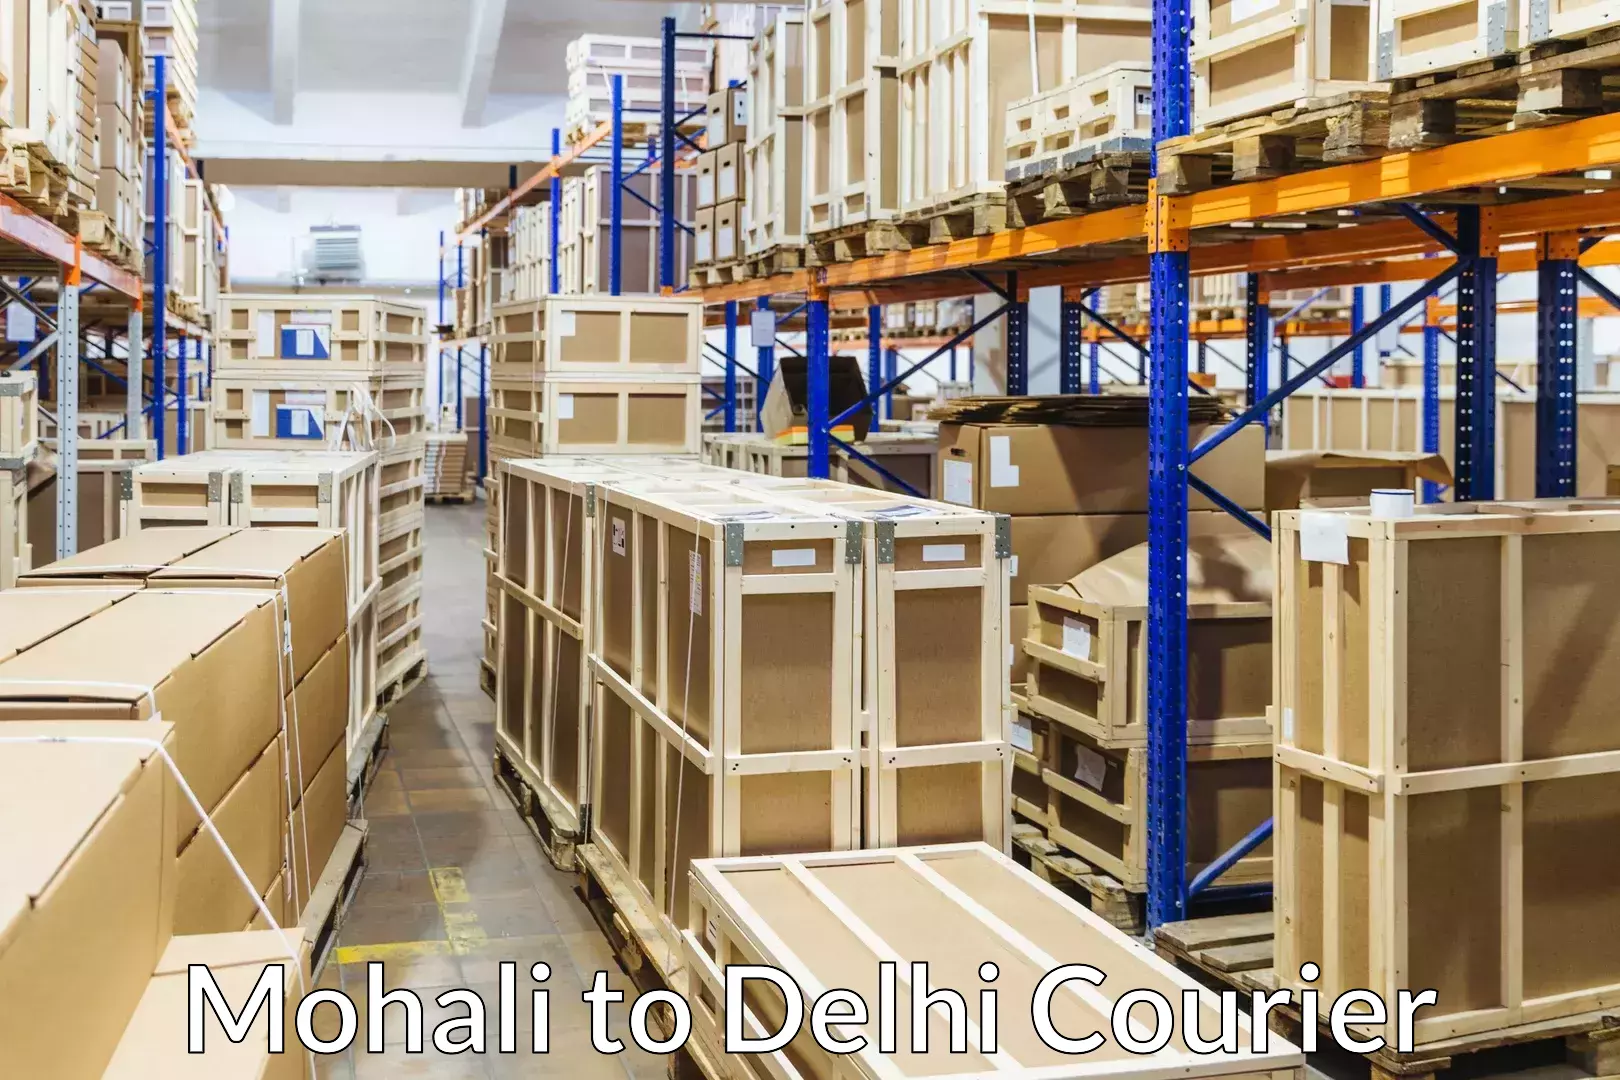 Trusted relocation experts Mohali to East Delhi